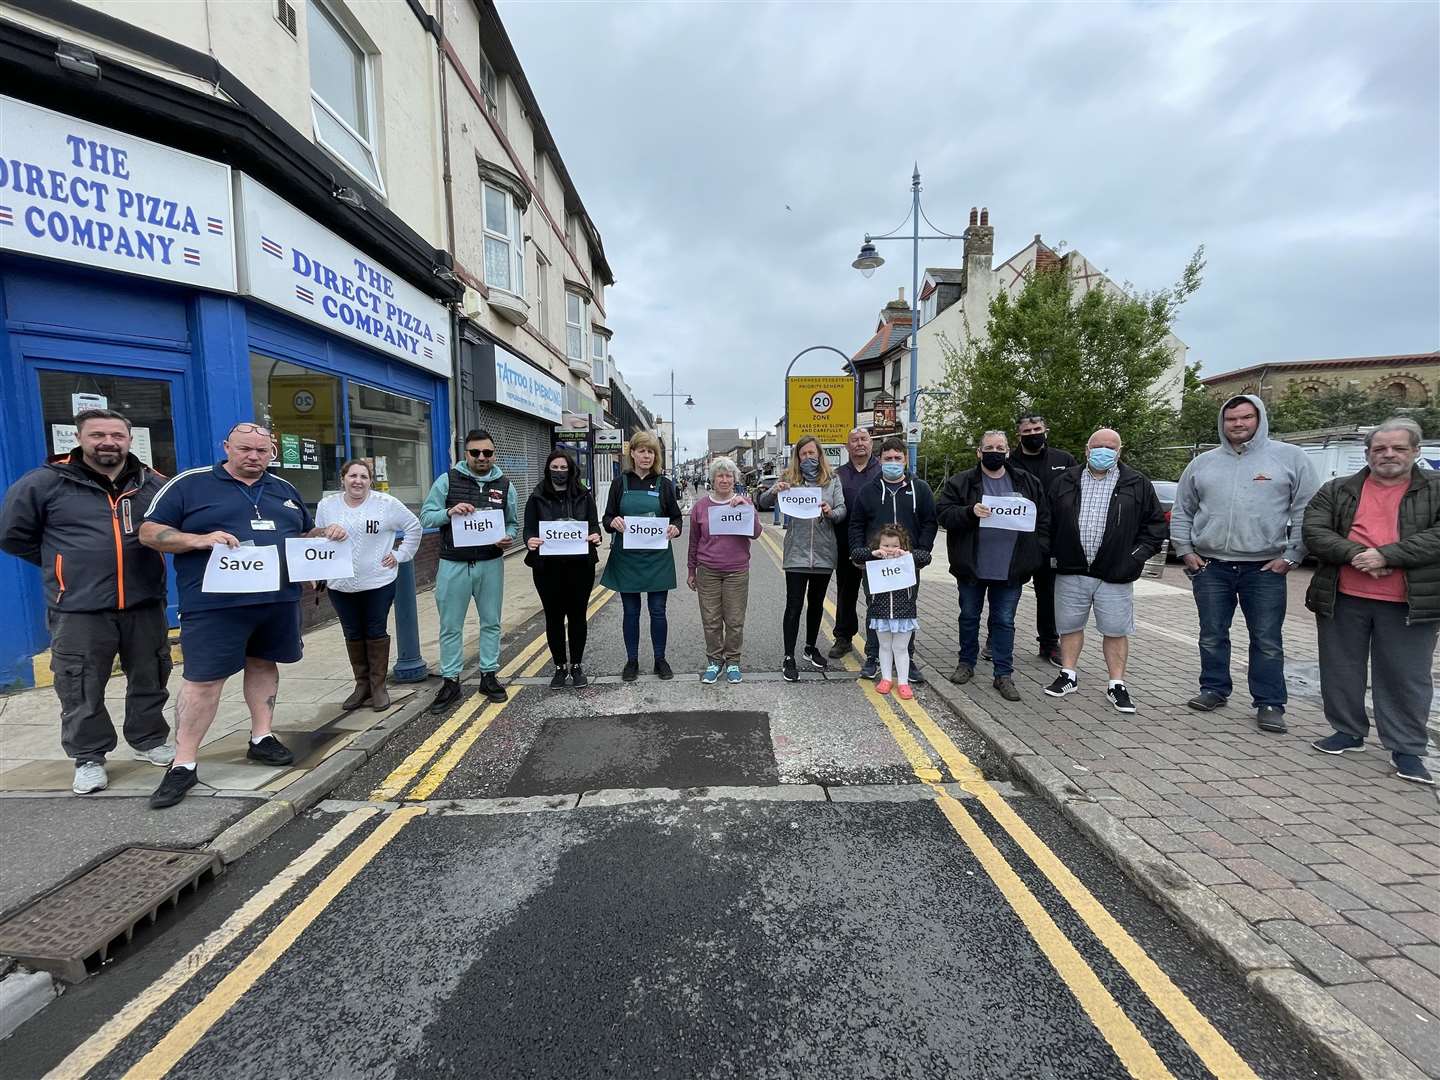 Fed-up shopkeepers in Sheerness launched a weekly protest in opposition to the high street pedestrianisation scheme there, saying it was killing their trade